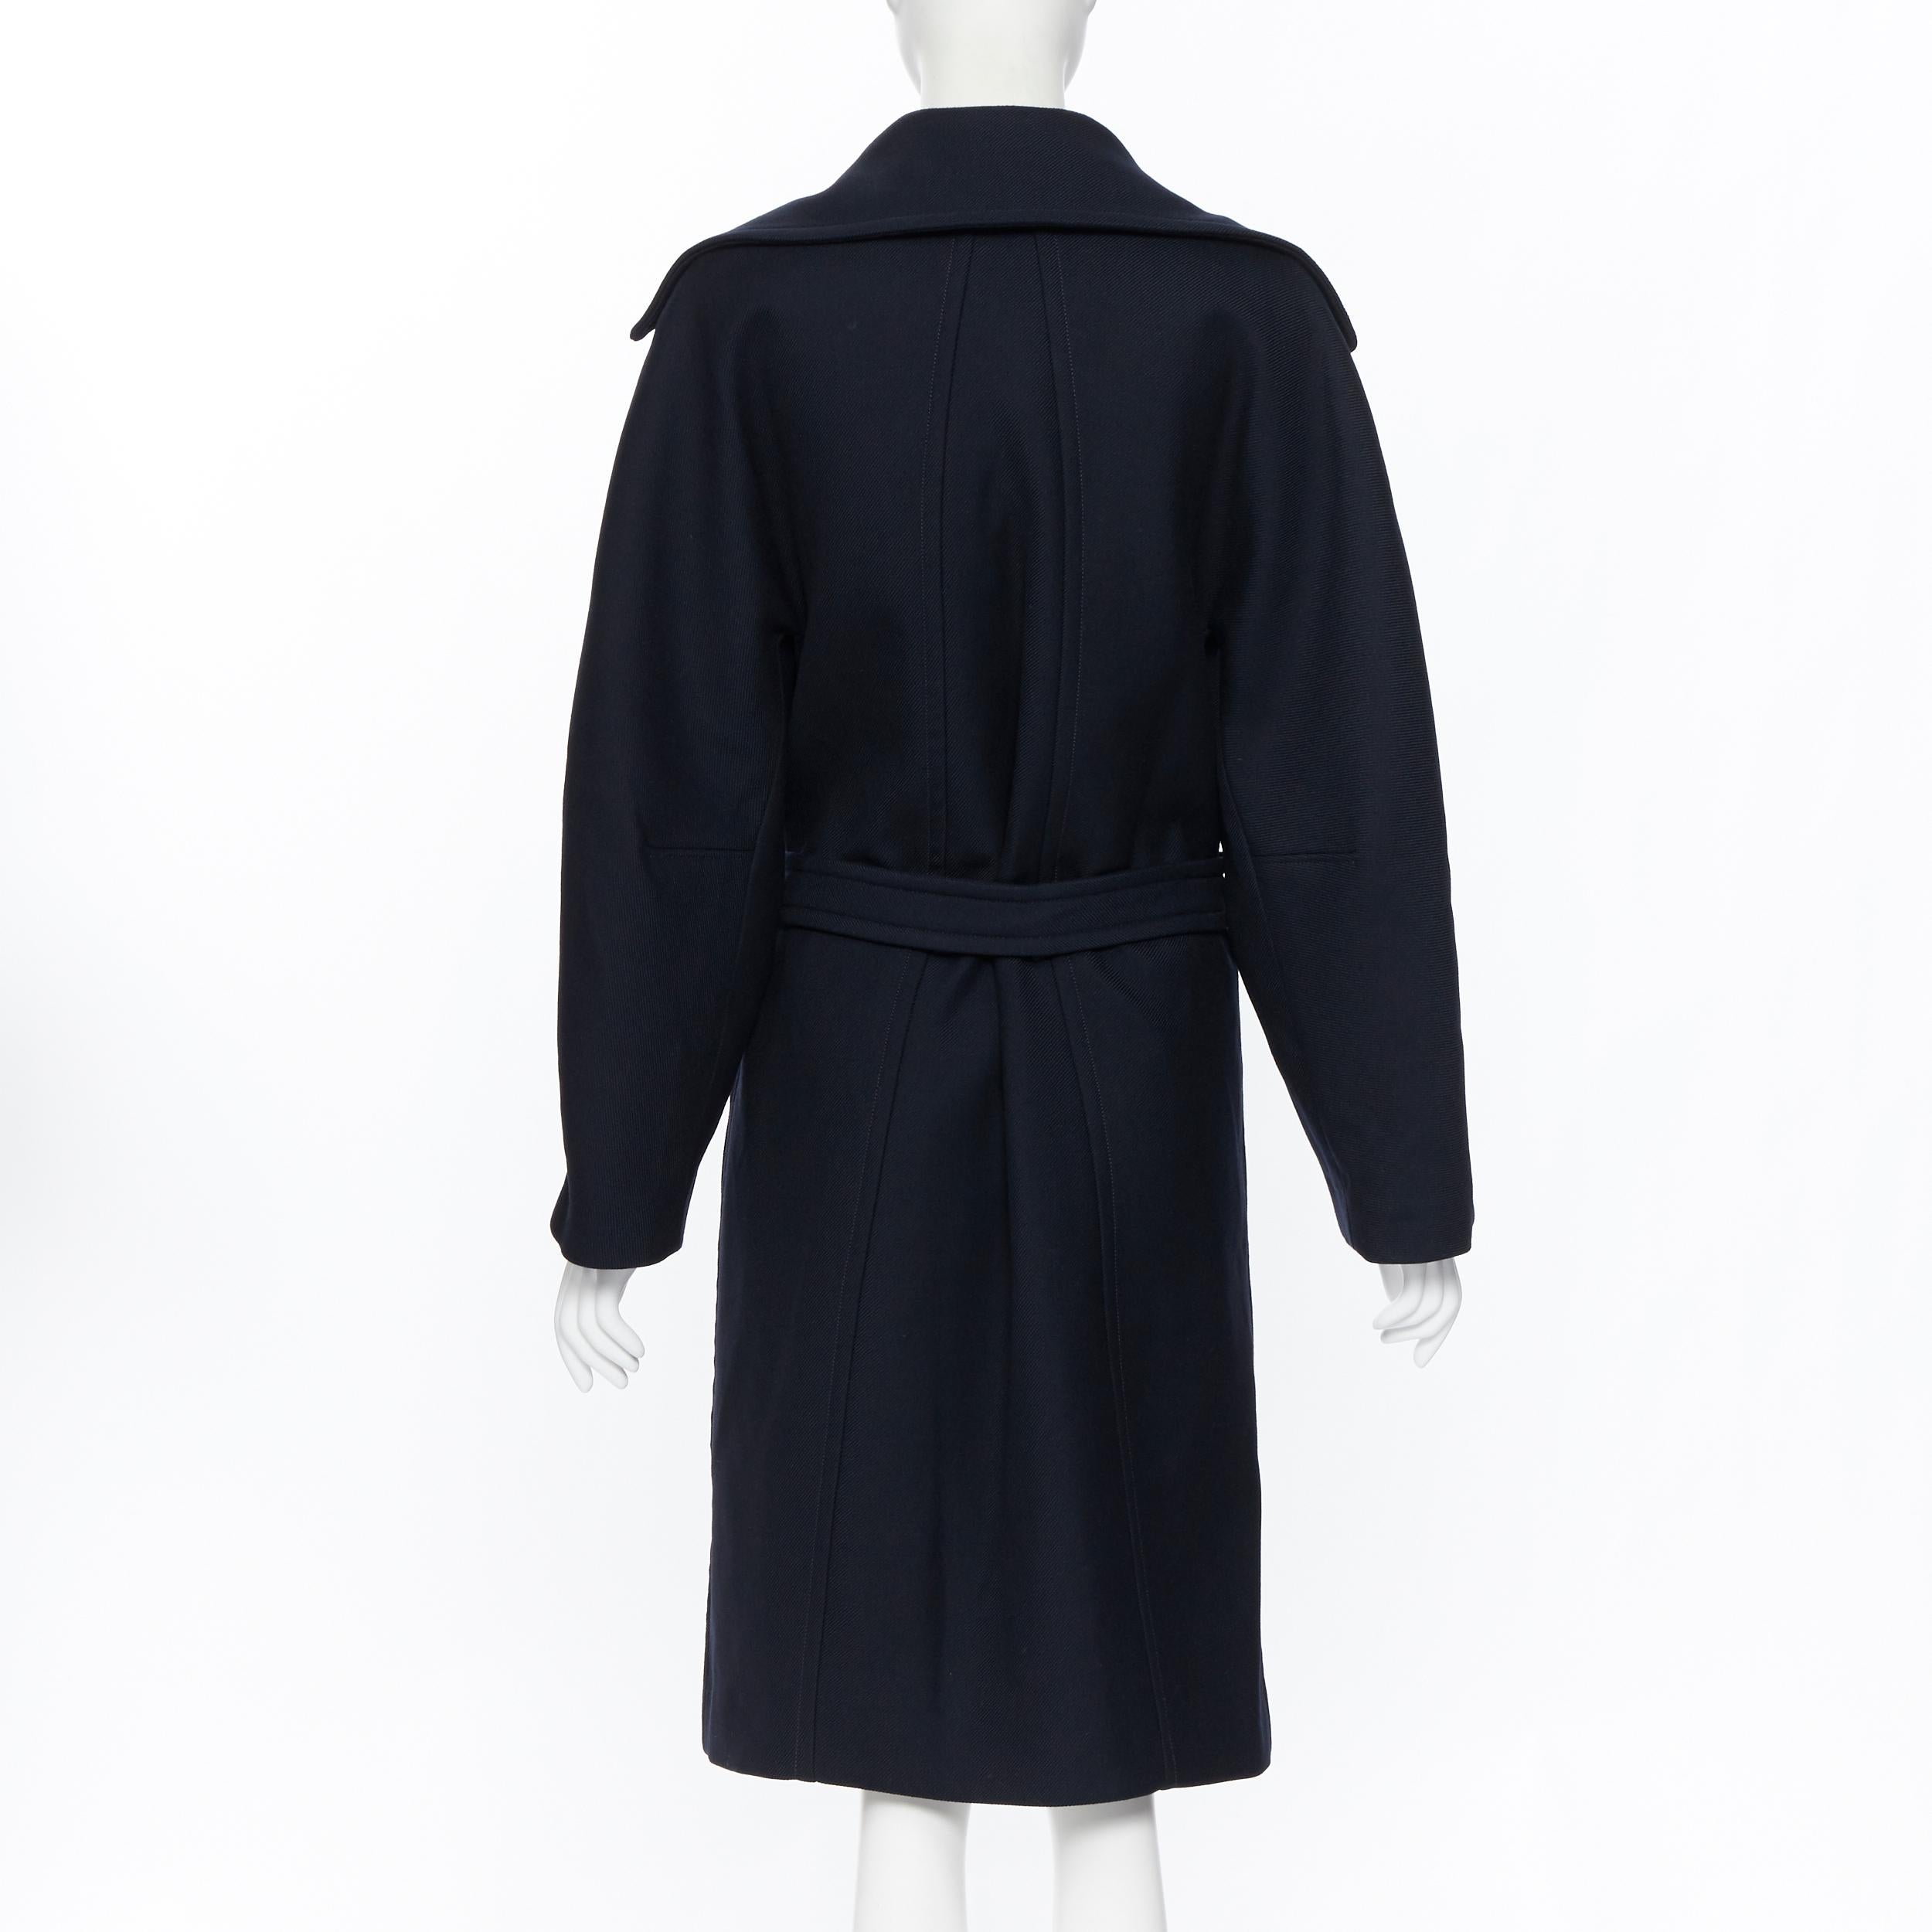 Black new CHLOE Iconic Navy wool ruffle front double brasted belted trench coat FR36